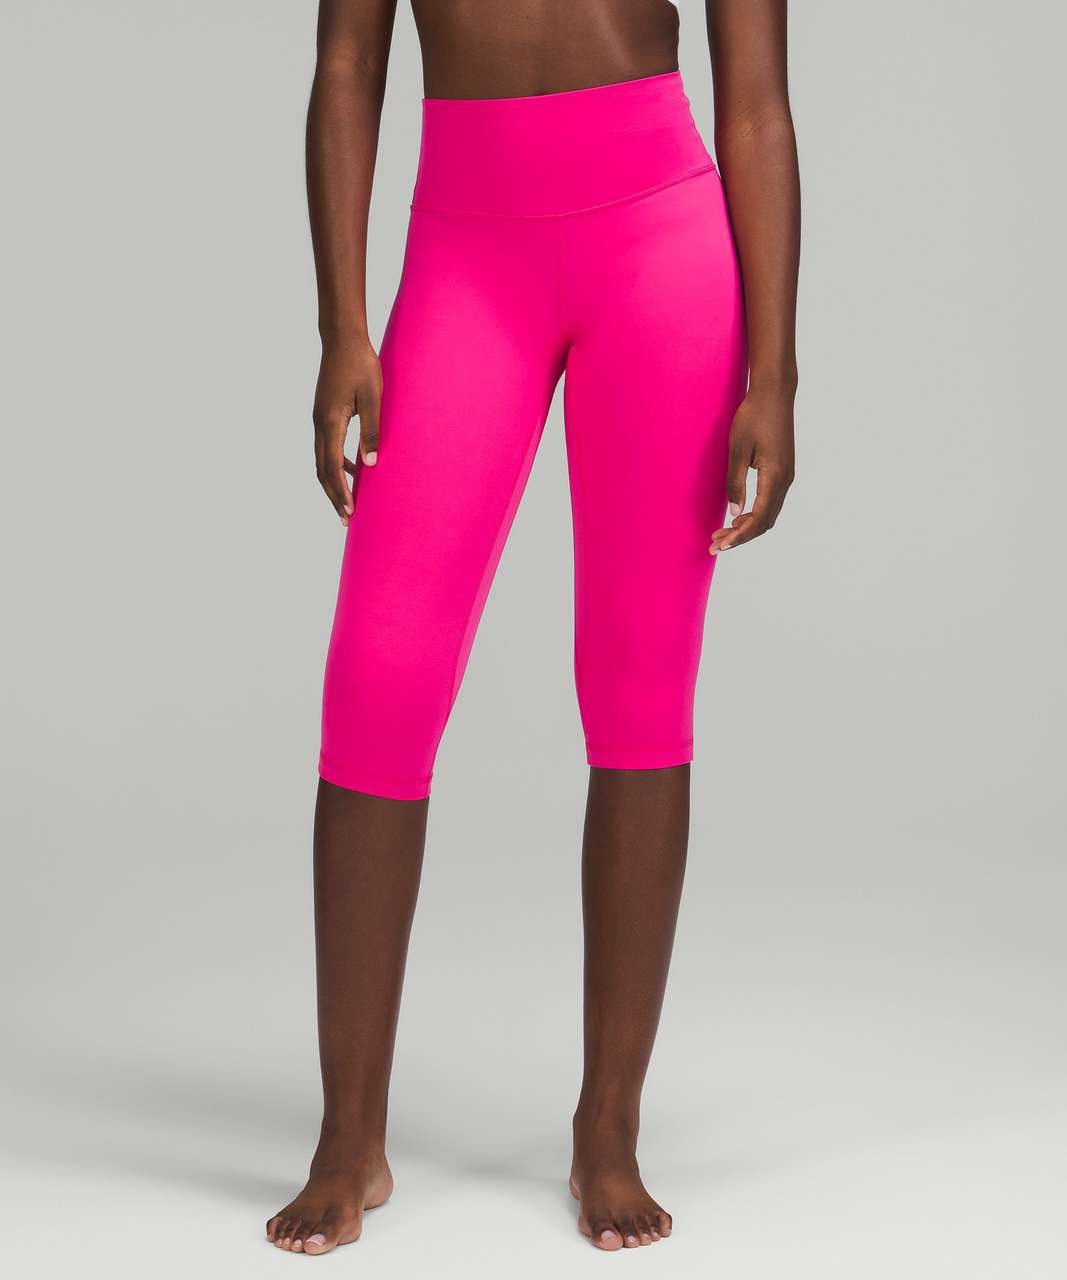 LEGGING REVIEW: lululemon aligns in sonic pink #fypage #fittok #gymtok